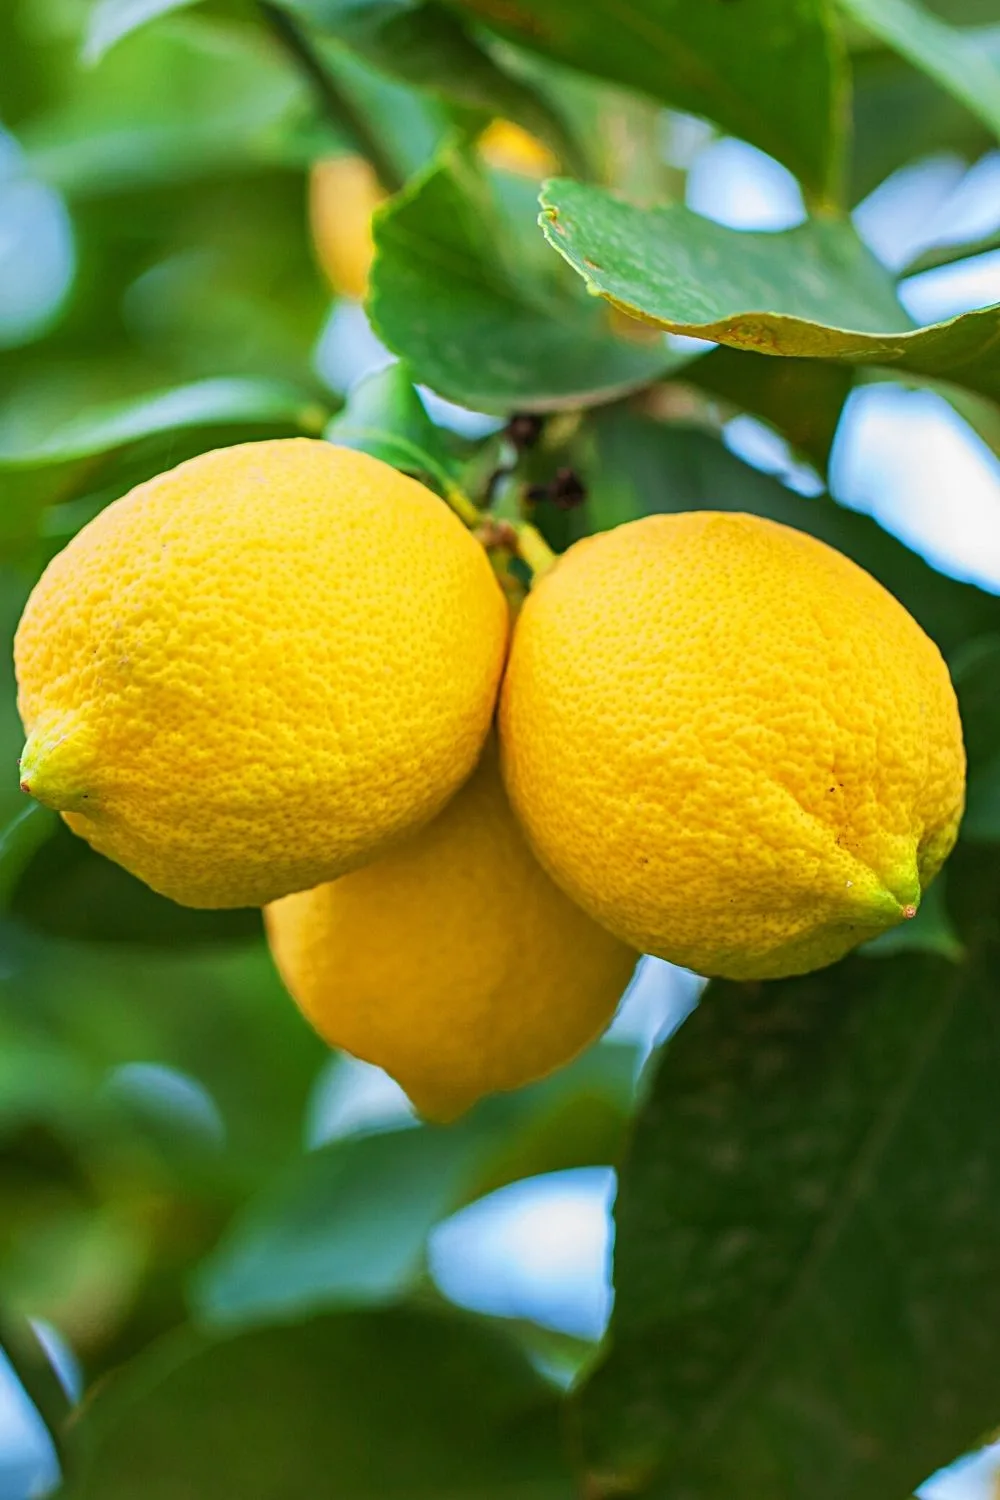 Another citrus plant that you can add to your edible plant collection on your south-facing balcony are Lemons